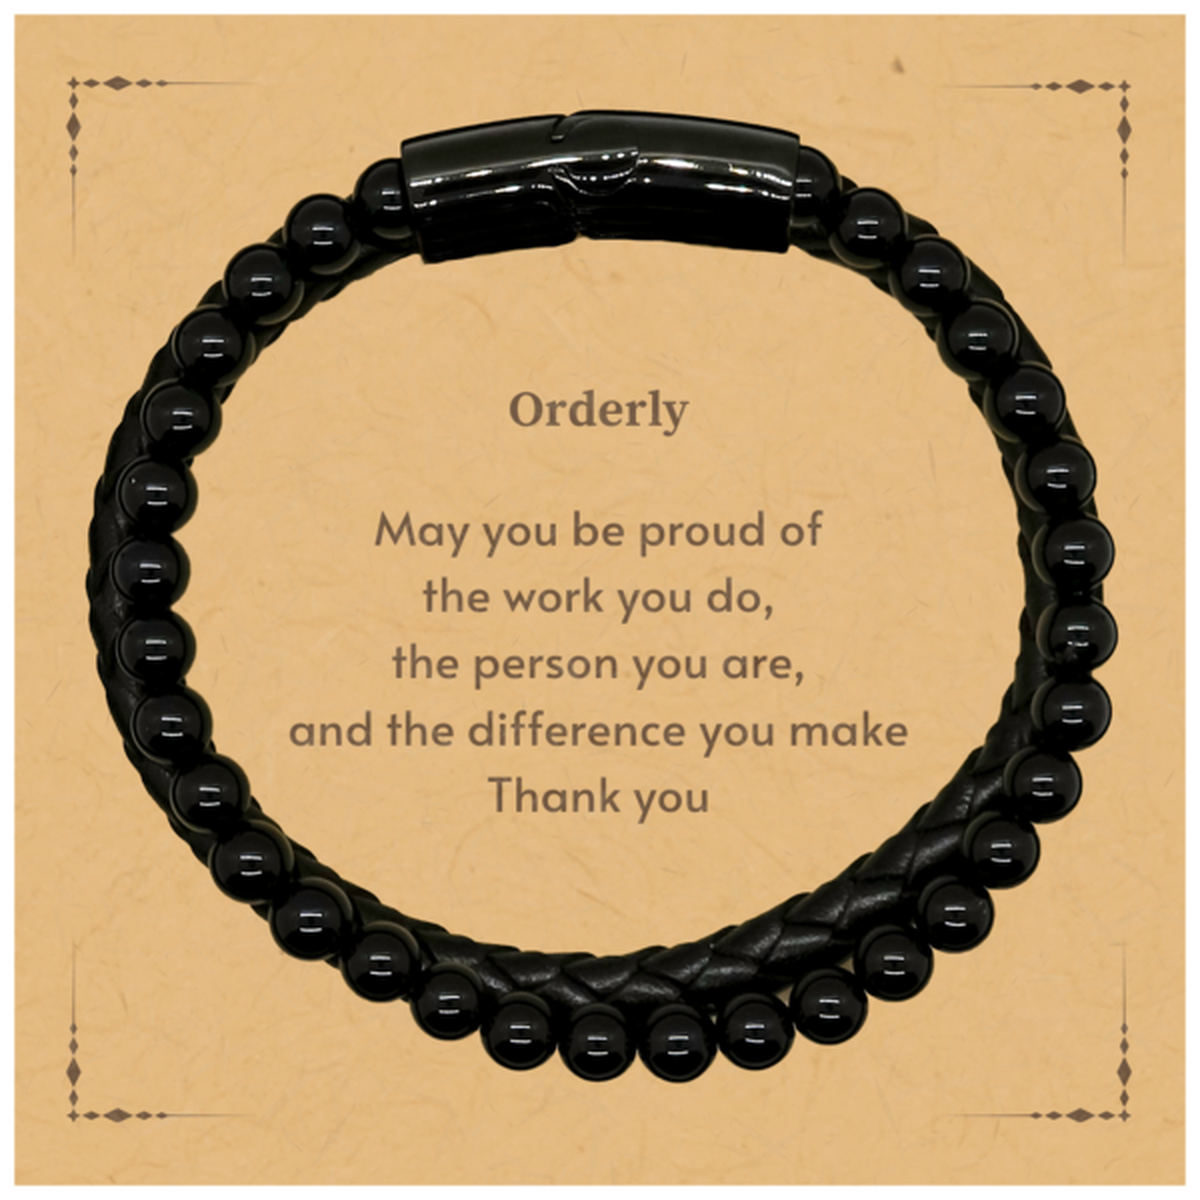 Heartwarming Stone Leather Bracelets Retirement Coworkers Gifts for Orderly, Orderly May You be proud of the work you do, the person you are Gifts for Boss Men Women Friends